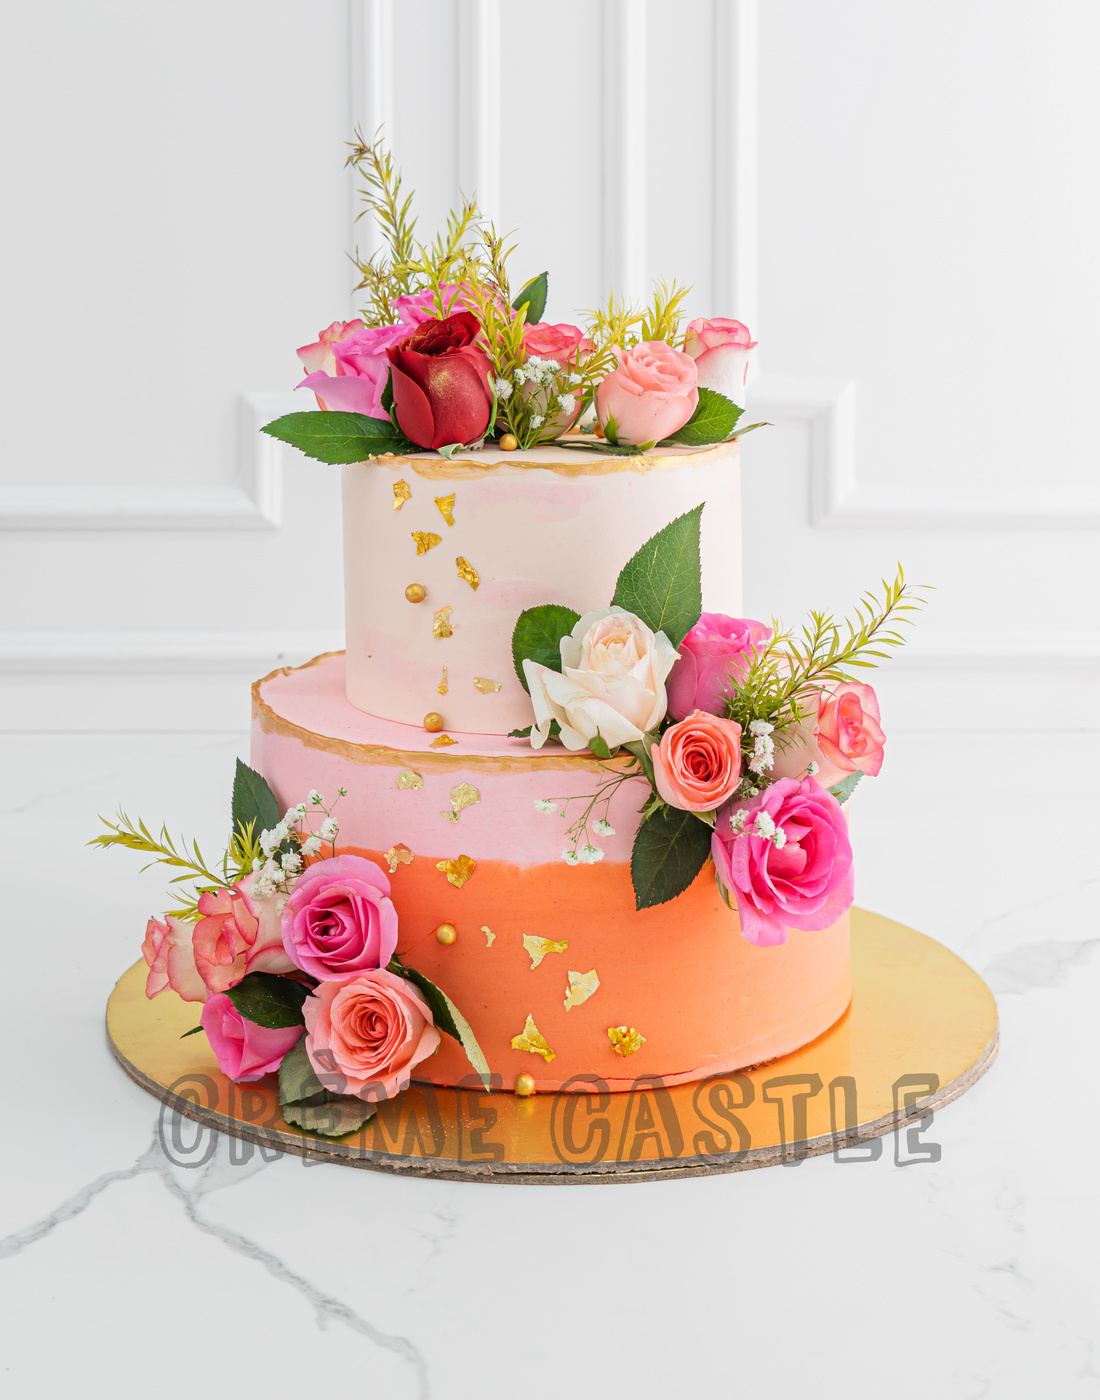 Trending Wedding Cake Designs That are Going to Rule 2022